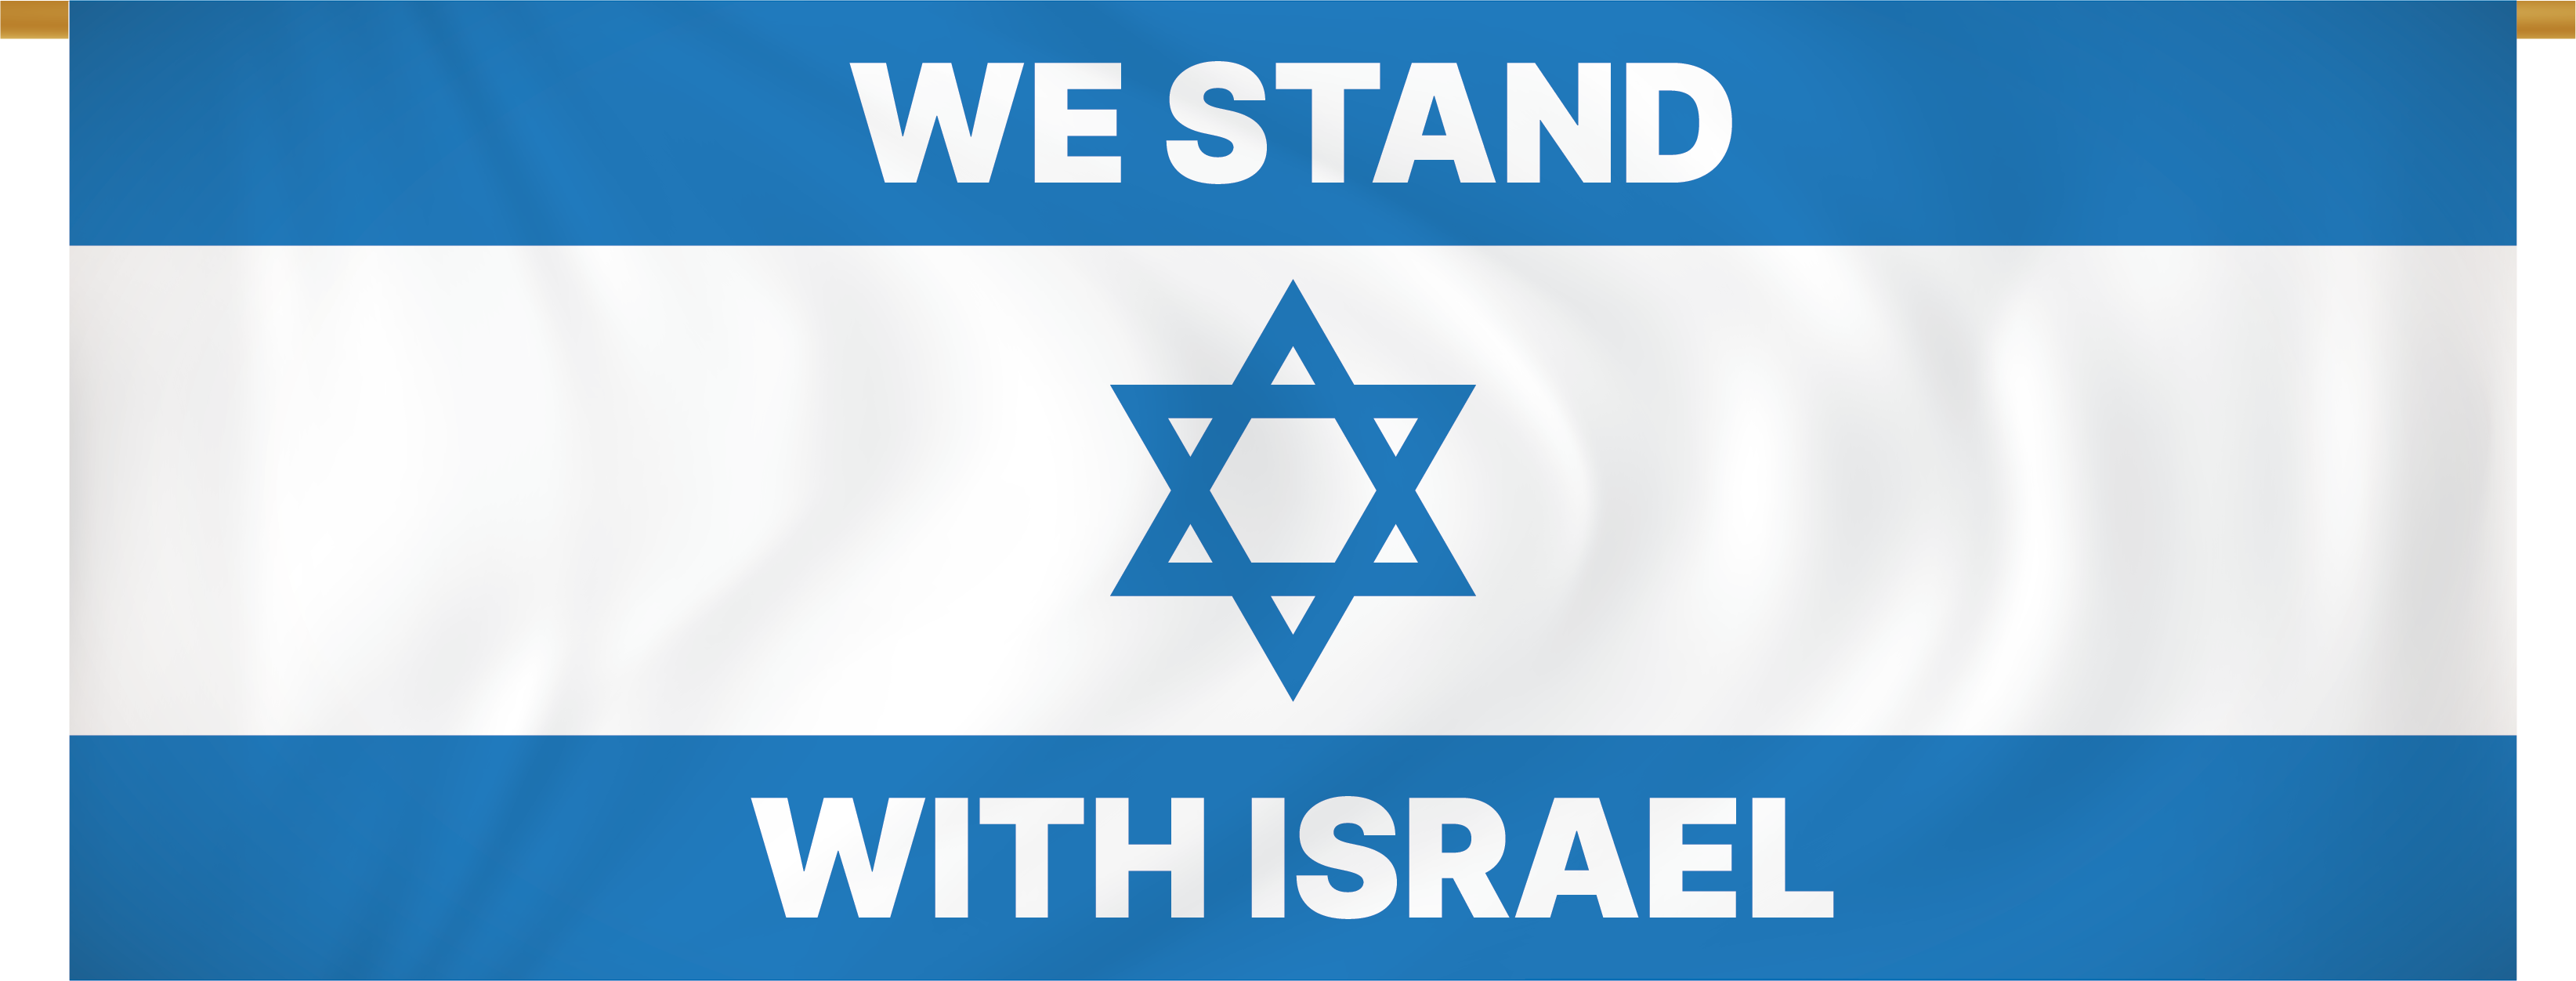 We Stand With Israel Marching Banner